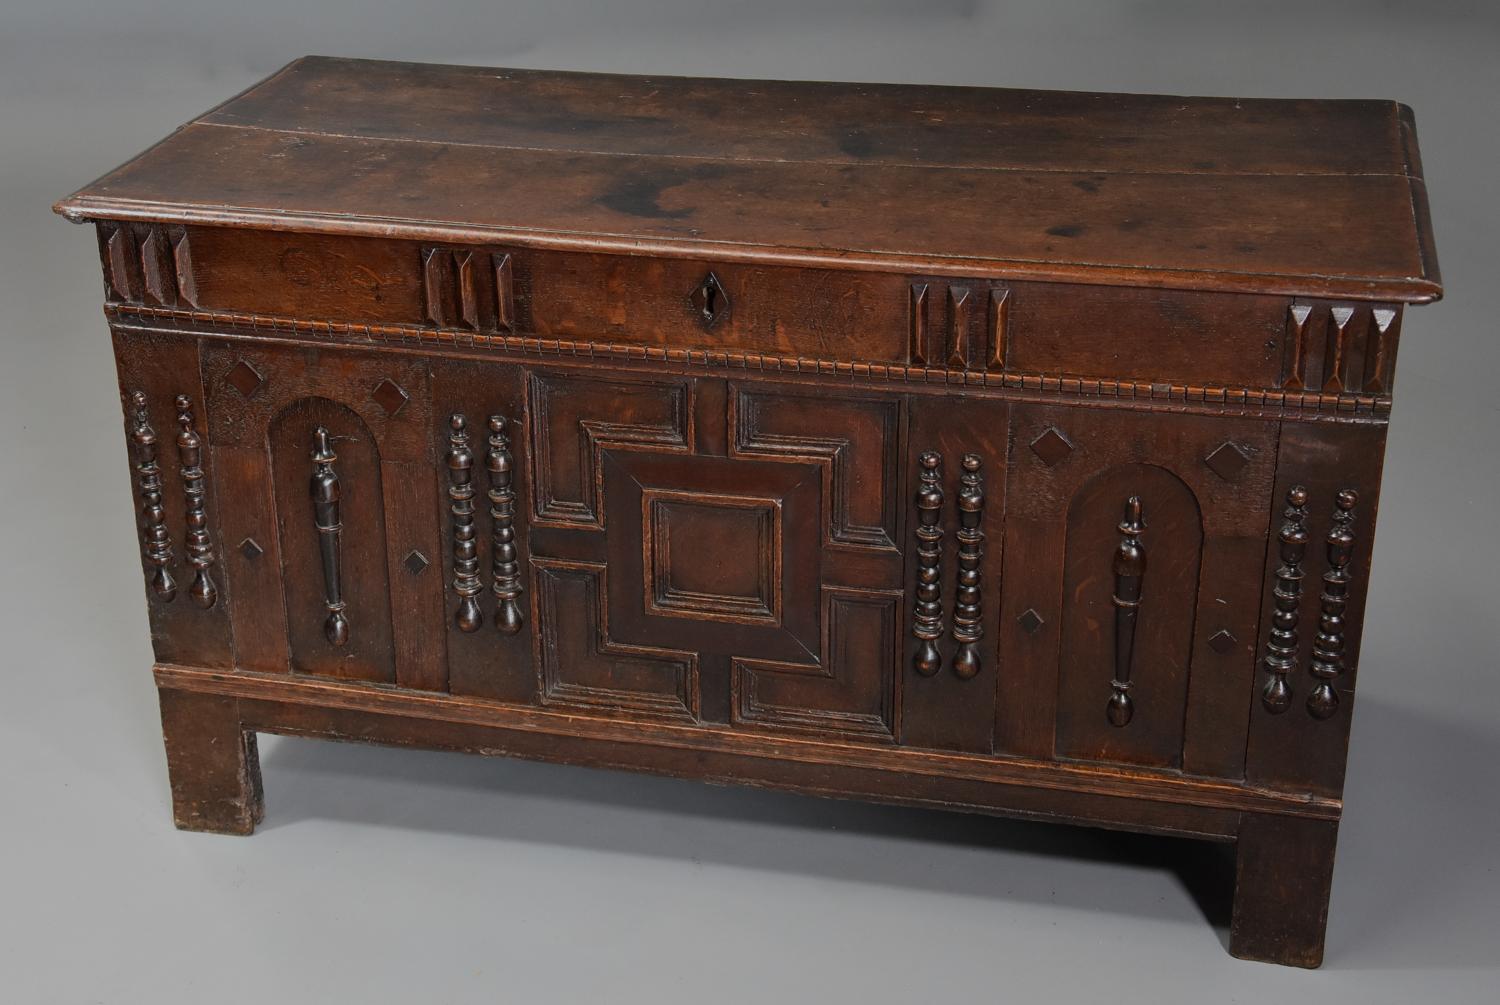 Rare mid-late 17th century oak moulded front coffer with fine patina